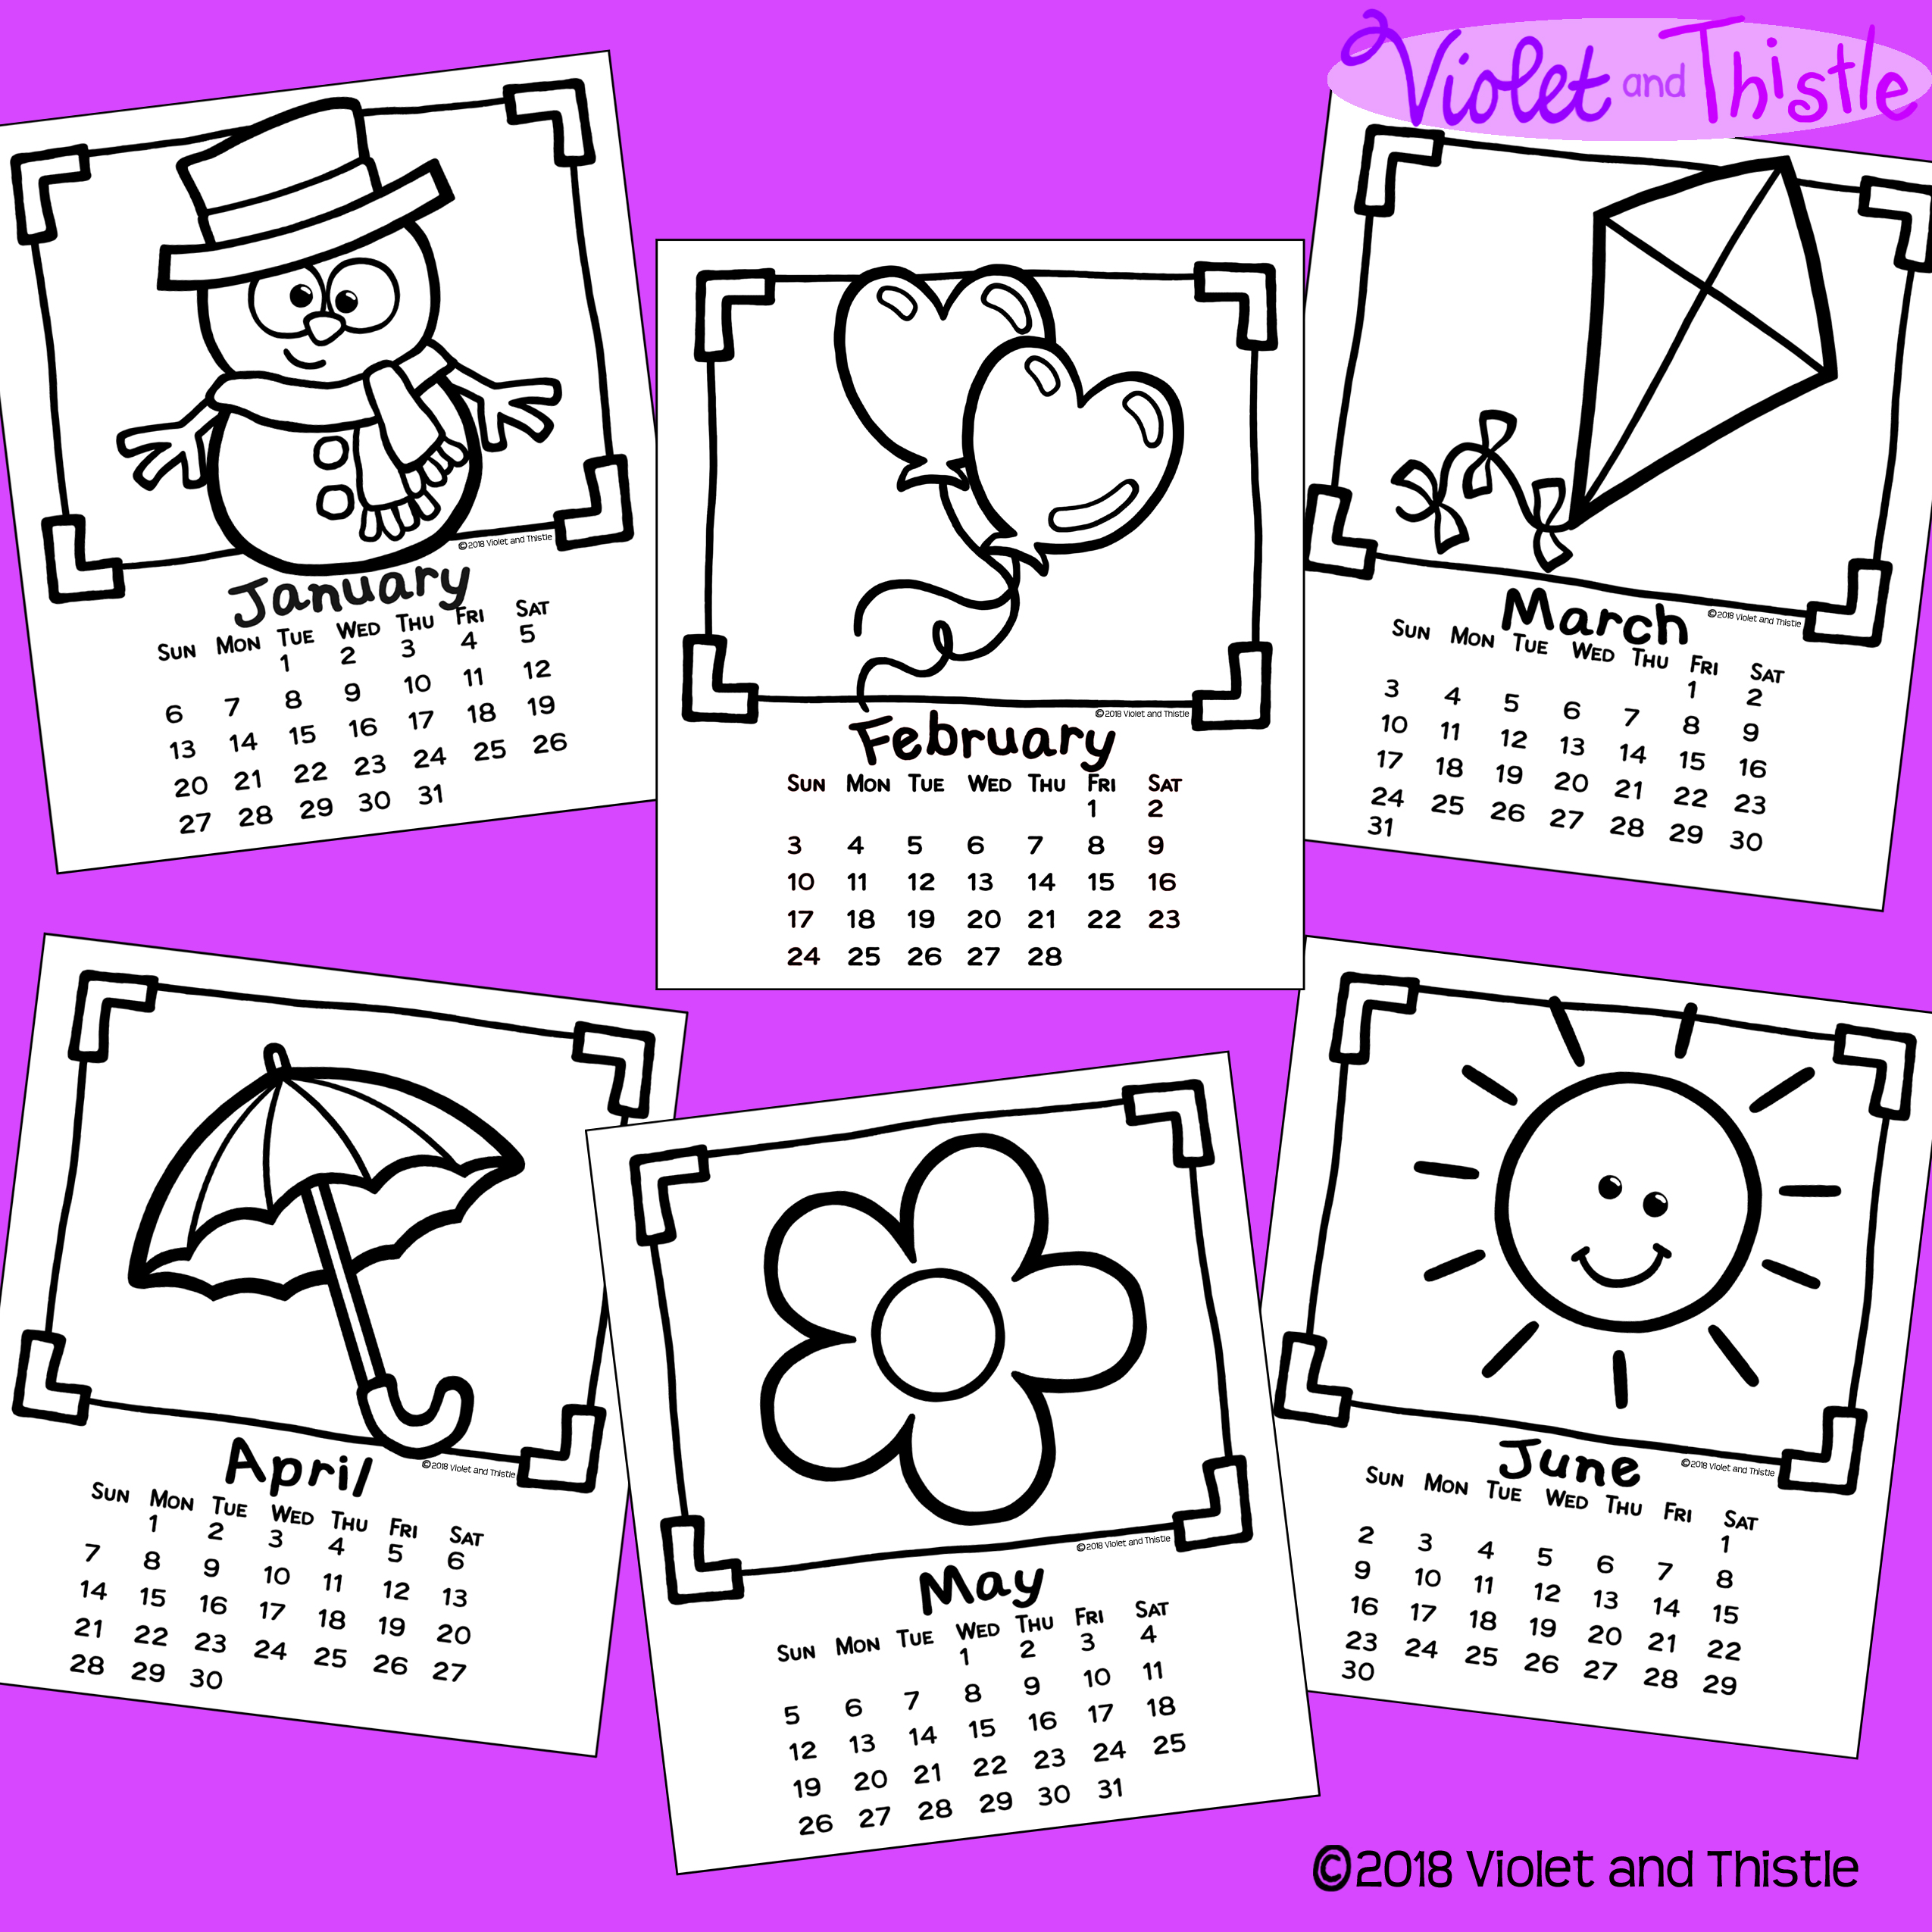 And coloring calendar printable to color parent christmas gift for parent kids made by teachers